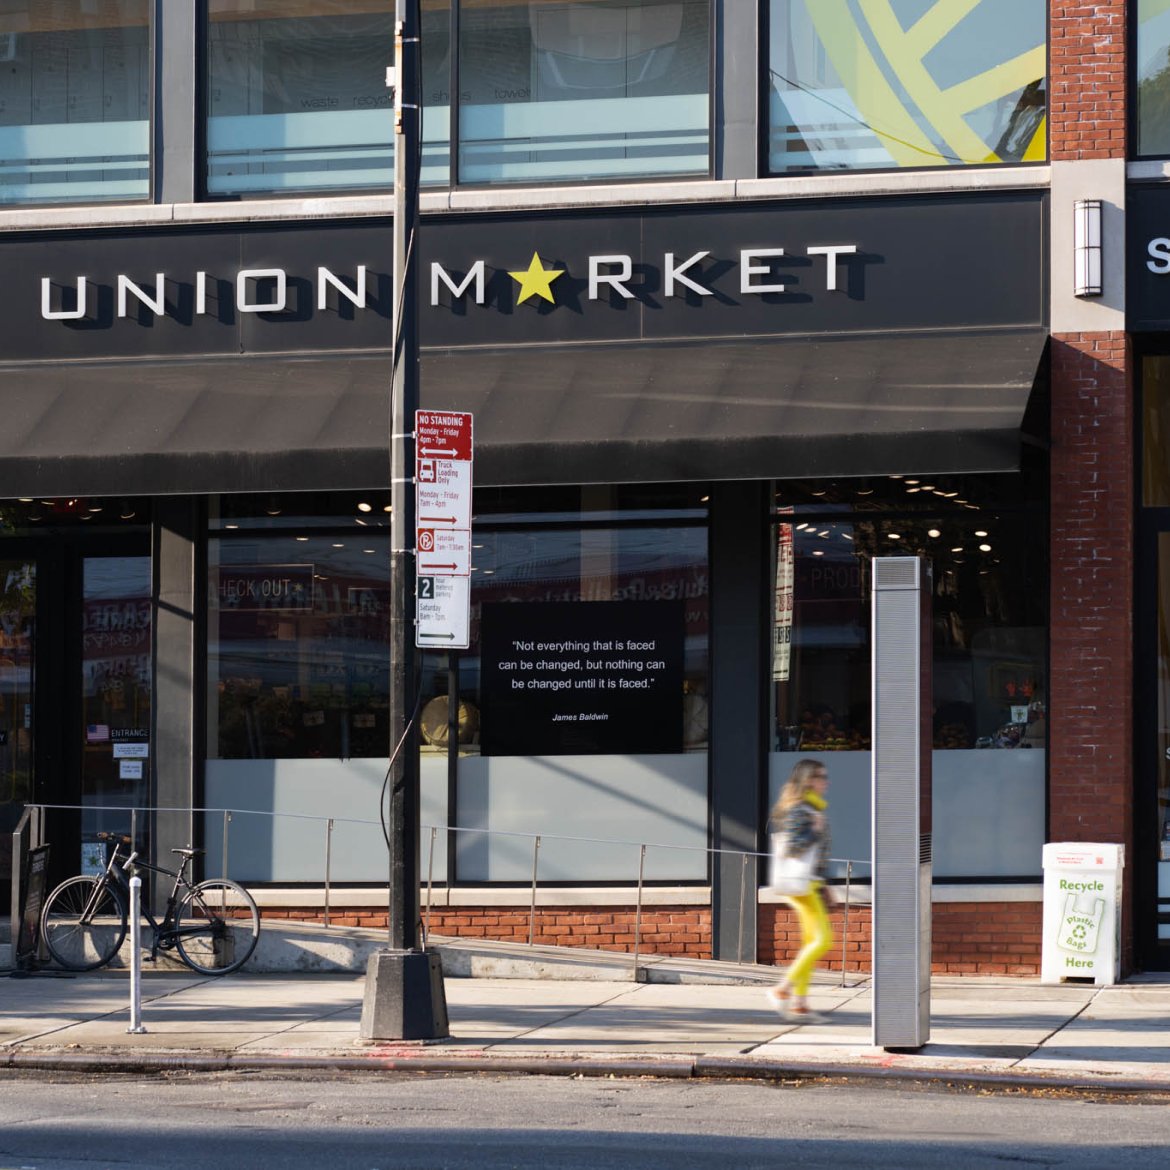 The grocery store Union Market as seen from street level.